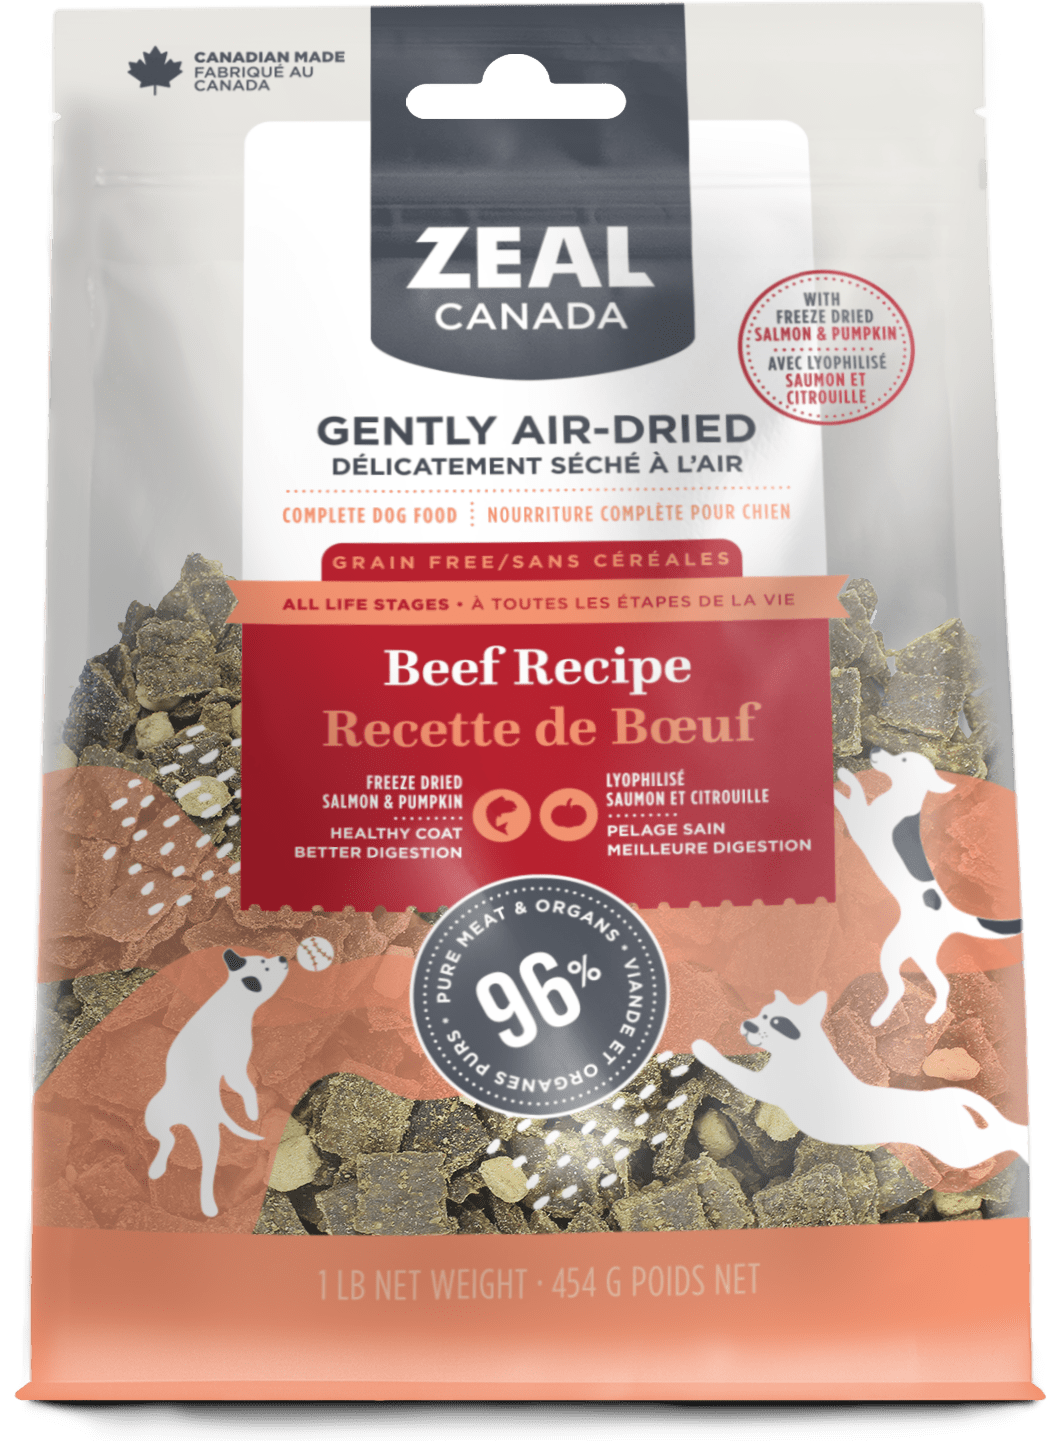 Beef with Freeze-Dried Salmon & Pumpkin - Air Dried Dog Food -  Zeal